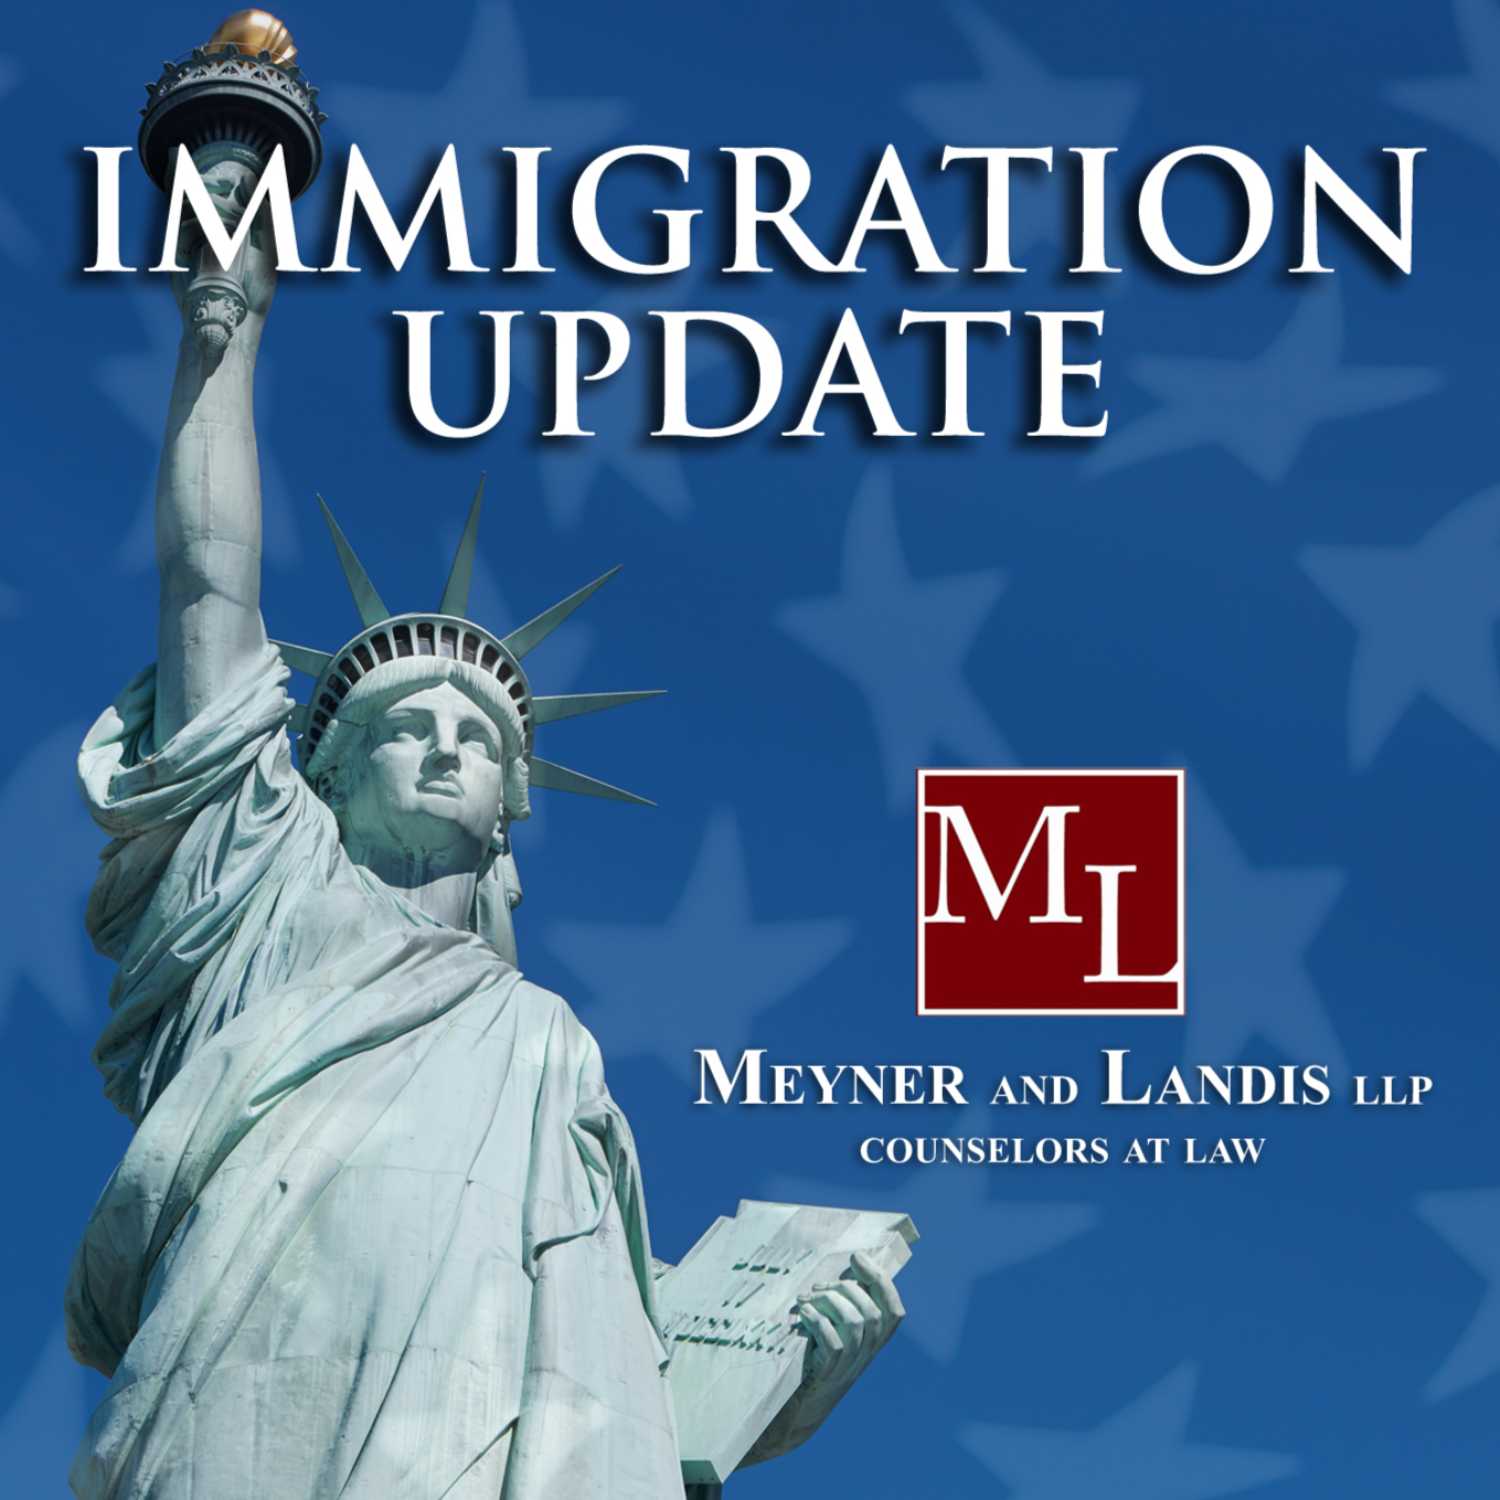 Jan 11, 2021: Form I-94 Arrival/Departure Record is Essential